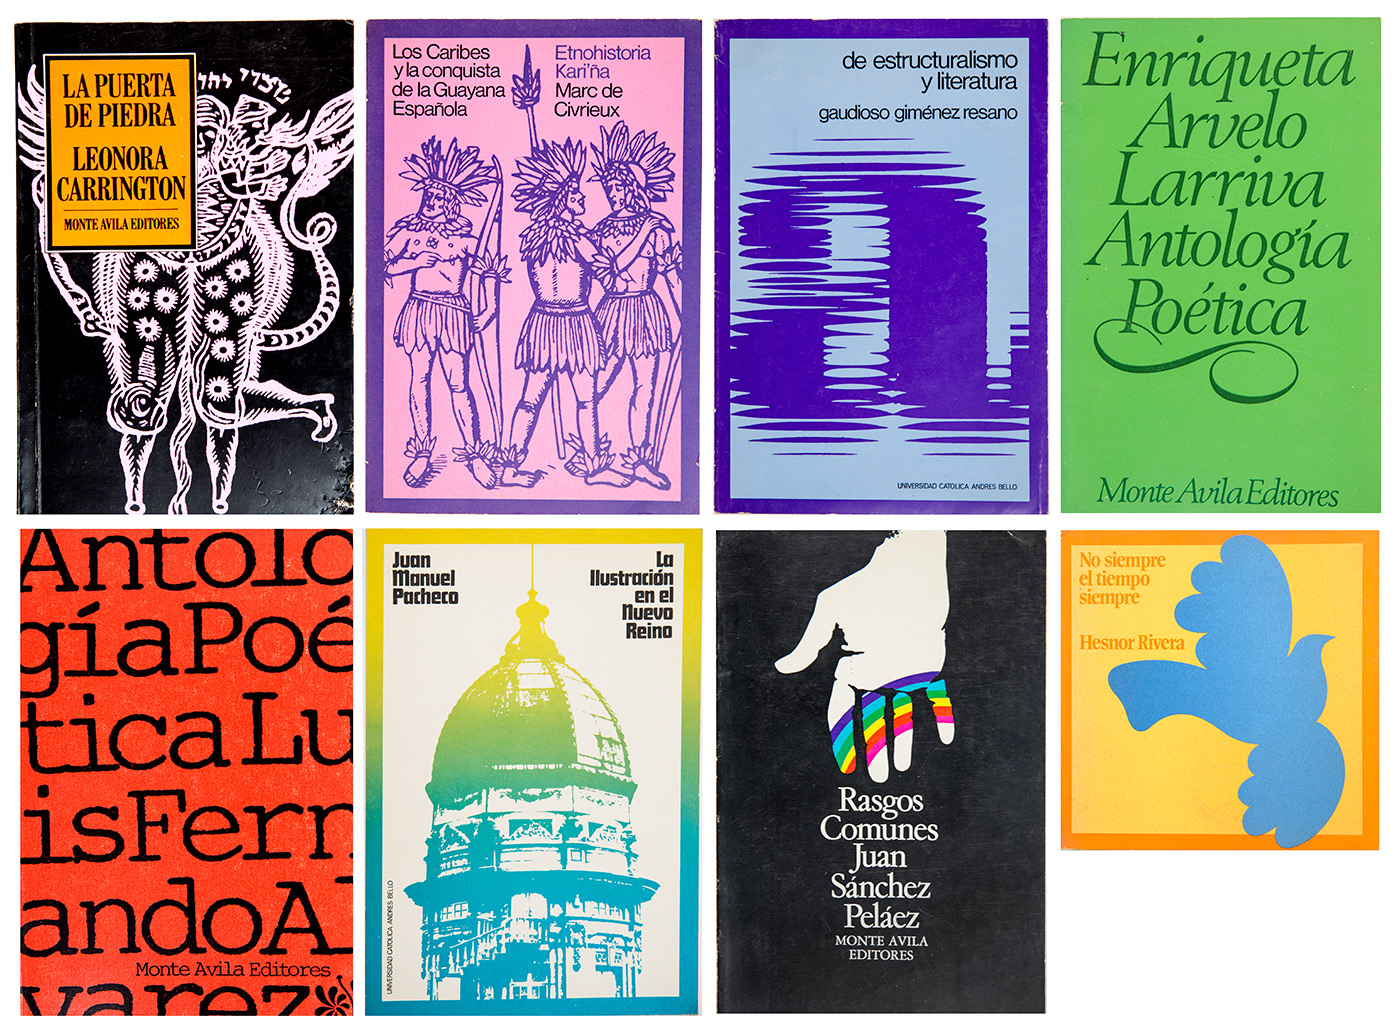 Some of Victor Viano's covers printed at Editorial Arte